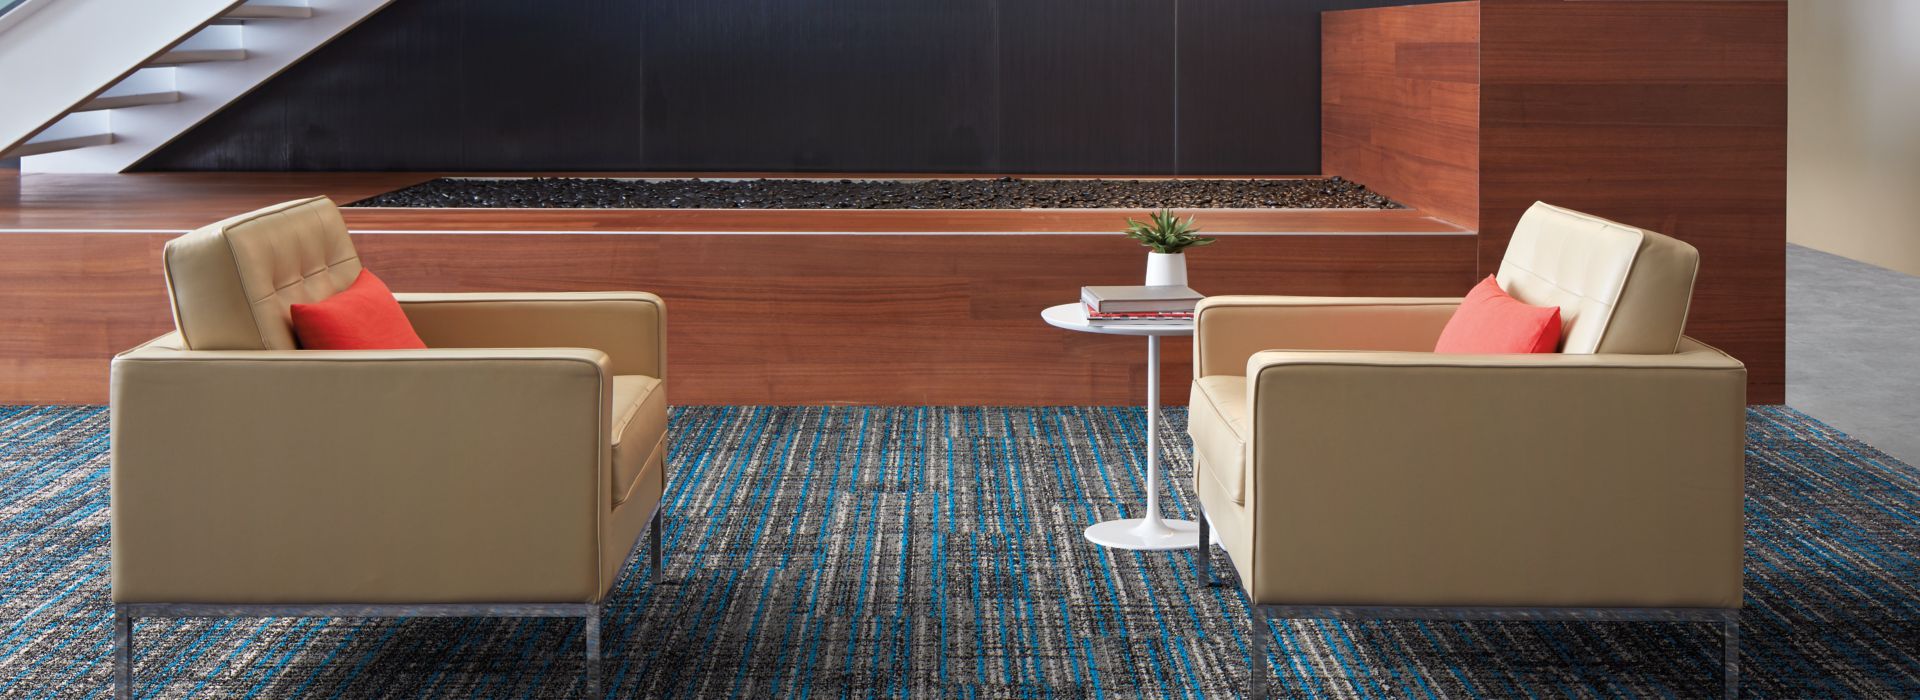 Interface Upload carpet tile and Textured Stones LVT in lobby area with couches image number 1